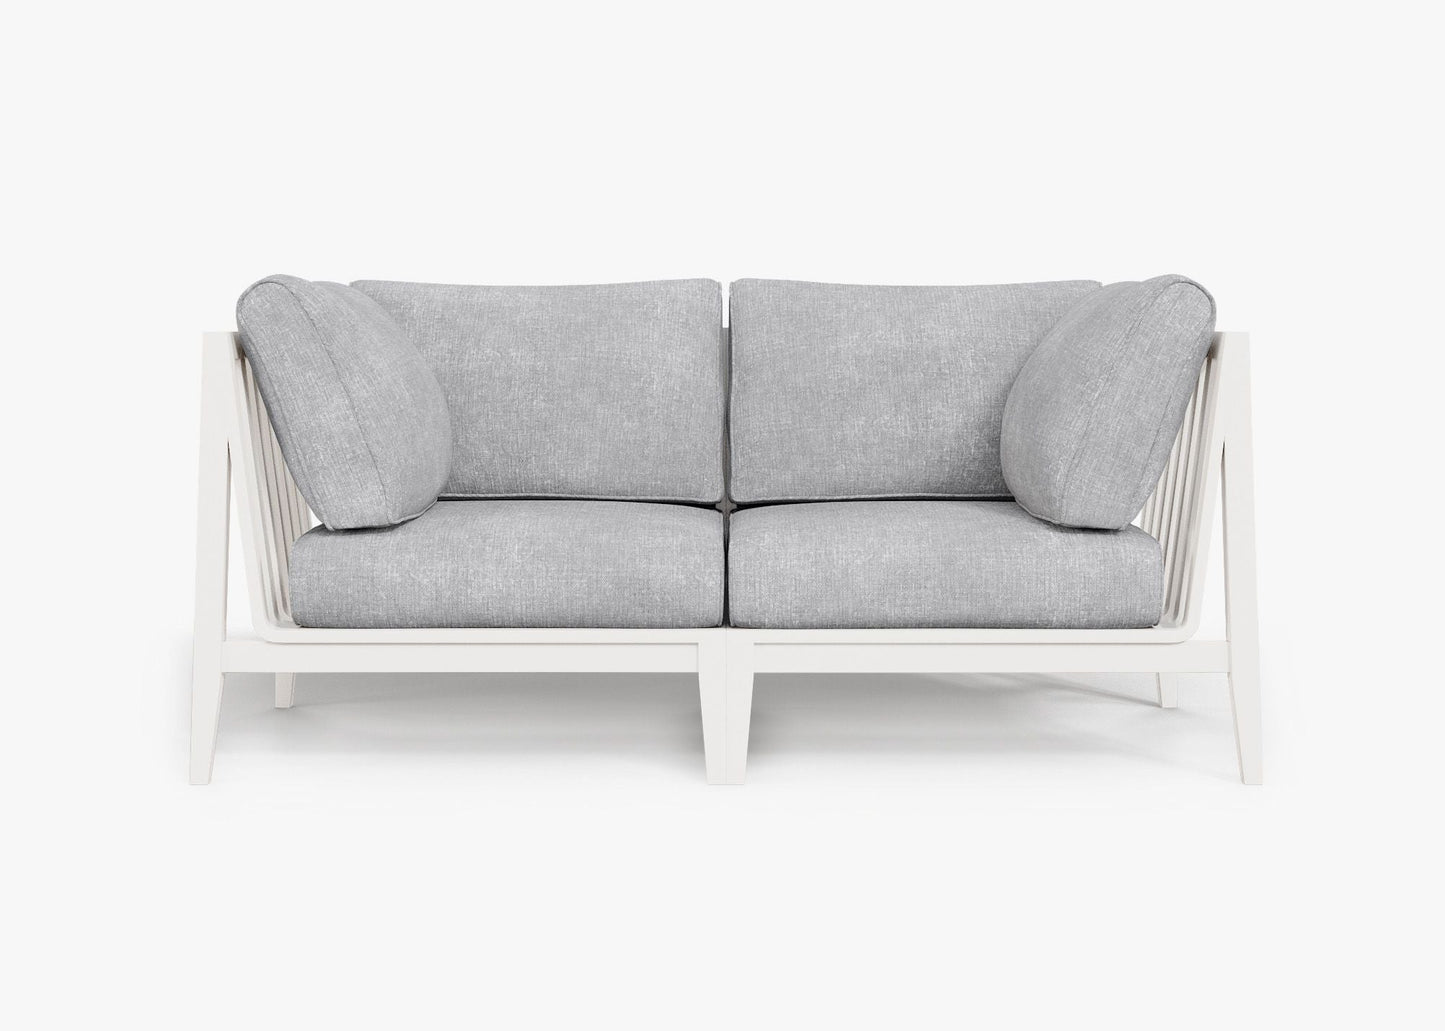 Live Outer 69" White Aluminum Outdoor Loveseat With Pacific Fog Gray Cushion